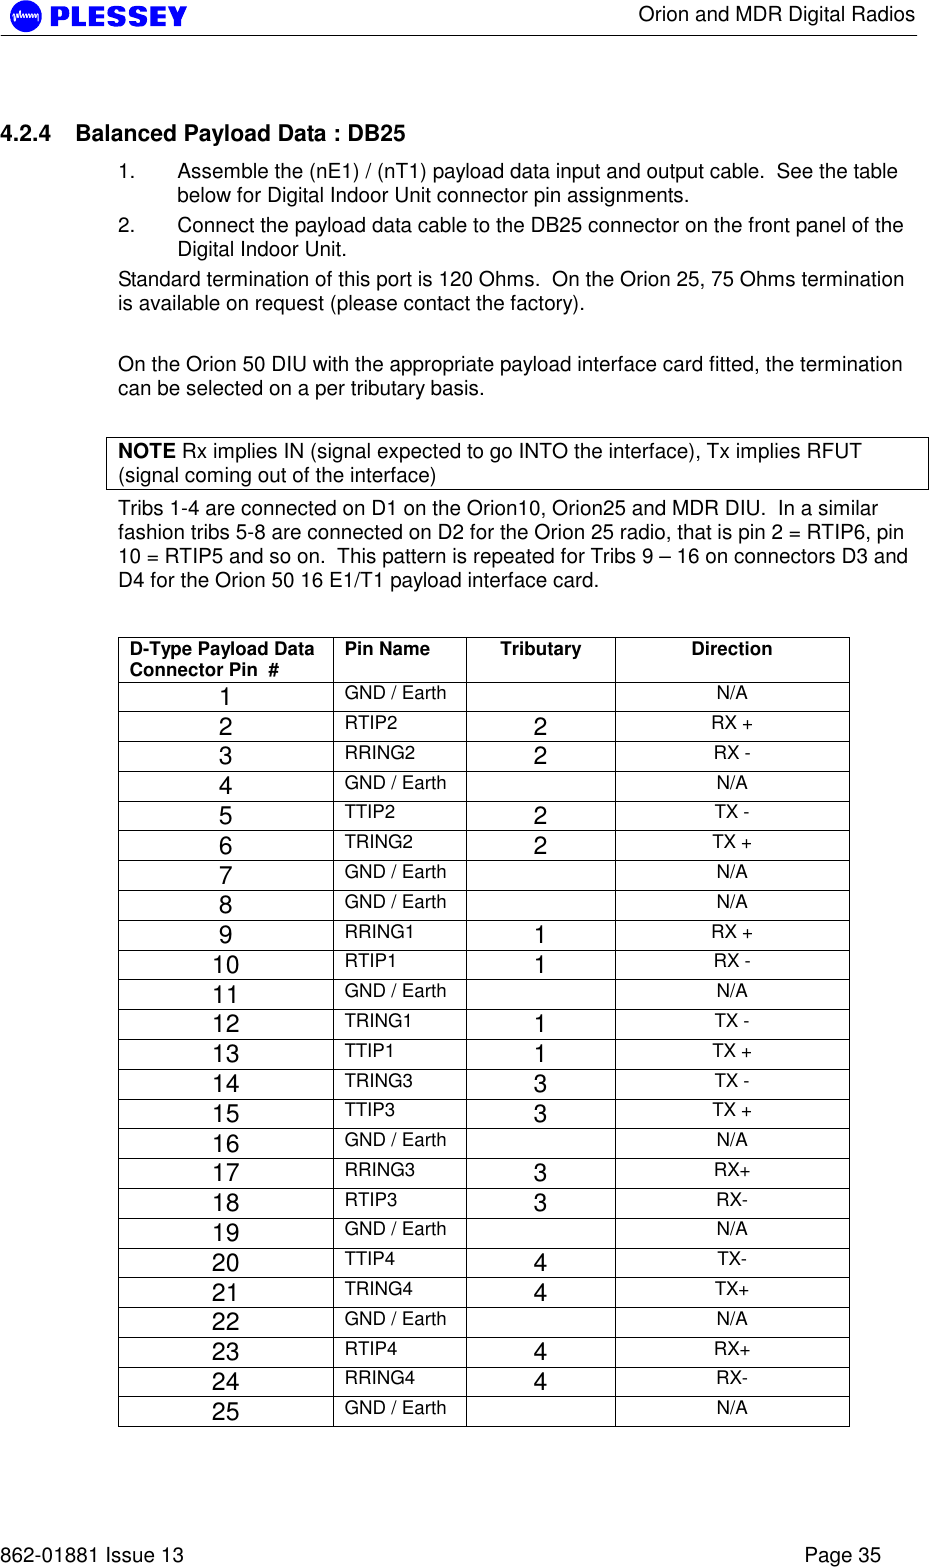      Orion and MDR Digital Radios   862-01881 Issue 13    Page 35 4.2.4  Balanced Payload Data : DB25 1.  Assemble the (nE1) / (nT1) payload data input and output cable.  See the table below for Digital Indoor Unit connector pin assignments. 2.  Connect the payload data cable to the DB25 connector on the front panel of the Digital Indoor Unit. Standard termination of this port is 120 Ohms.  On the Orion 25, 75 Ohms termination is available on request (please contact the factory).    On the Orion 50 DIU with the appropriate payload interface card fitted, the termination can be selected on a per tributary basis.  NOTE Rx implies IN (signal expected to go INTO the interface), Tx implies RFUT (signal coming out of the interface) Tribs 1-4 are connected on D1 on the Orion10, Orion25 and MDR DIU.  In a similar fashion tribs 5-8 are connected on D2 for the Orion 25 radio, that is pin 2 = RTIP6, pin 10 = RTIP5 and so on.  This pattern is repeated for Tribs 9 – 16 on connectors D3 and D4 for the Orion 50 16 E1/T1 payload interface card.   D-Type Payload Data Connector Pin  # Pin Name  Tributary  Direction 1  GND / Earth   N/A 2  RTIP2  2  RX + 3  RRING2  2  RX - 4  GND / Earth   N/A 5  TTIP2  2  TX - 6  TRING2  2  TX + 7  GND / Earth   N/A 8  GND / Earth   N/A 9  RRING1  1  RX + 10  RTIP1  1  RX - 11  GND / Earth   N/A 12  TRING1  1  TX - 13  TTIP1  1  TX + 14  TRING3  3  TX - 15  TTIP3  3  TX + 16  GND / Earth   N/A 17  RRING3  3  RX+ 18  RTIP3  3  RX- 19  GND / Earth   N/A 20  TTIP4  4  TX- 21  TRING4  4  TX+ 22  GND / Earth   N/A 23  RTIP4  4  RX+ 24  RRING4  4  RX- 25  GND / Earth   N/A 